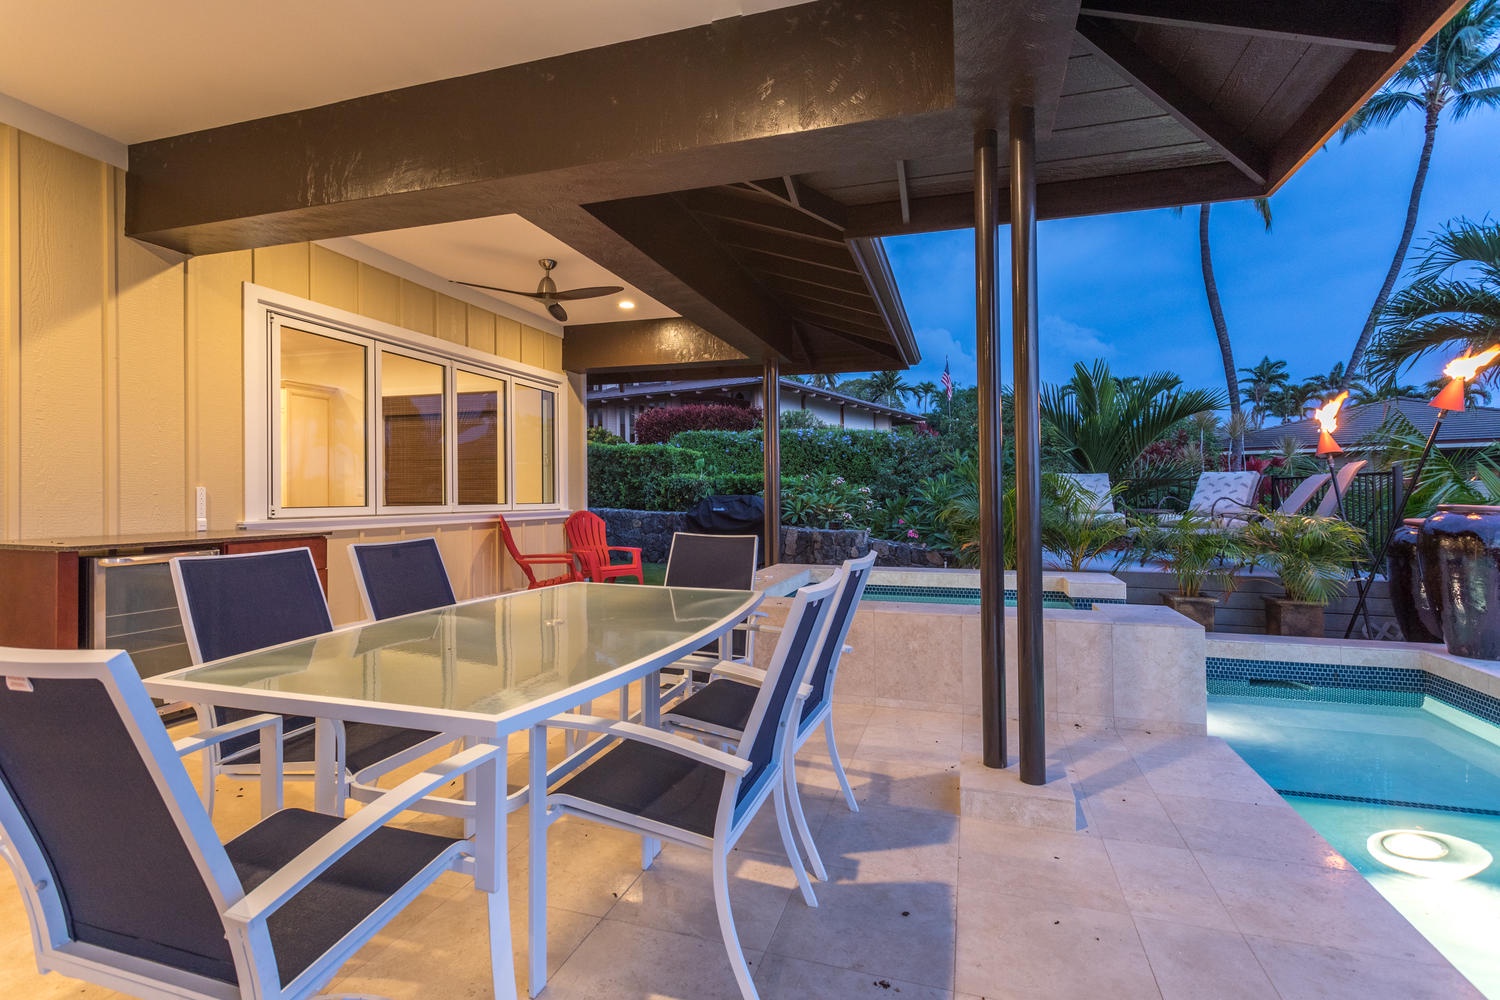 Kailua Kona Vacation Rentals, Ohana le'ale'a - Outdoor seating on the lanai makes it the perfect spot to relax